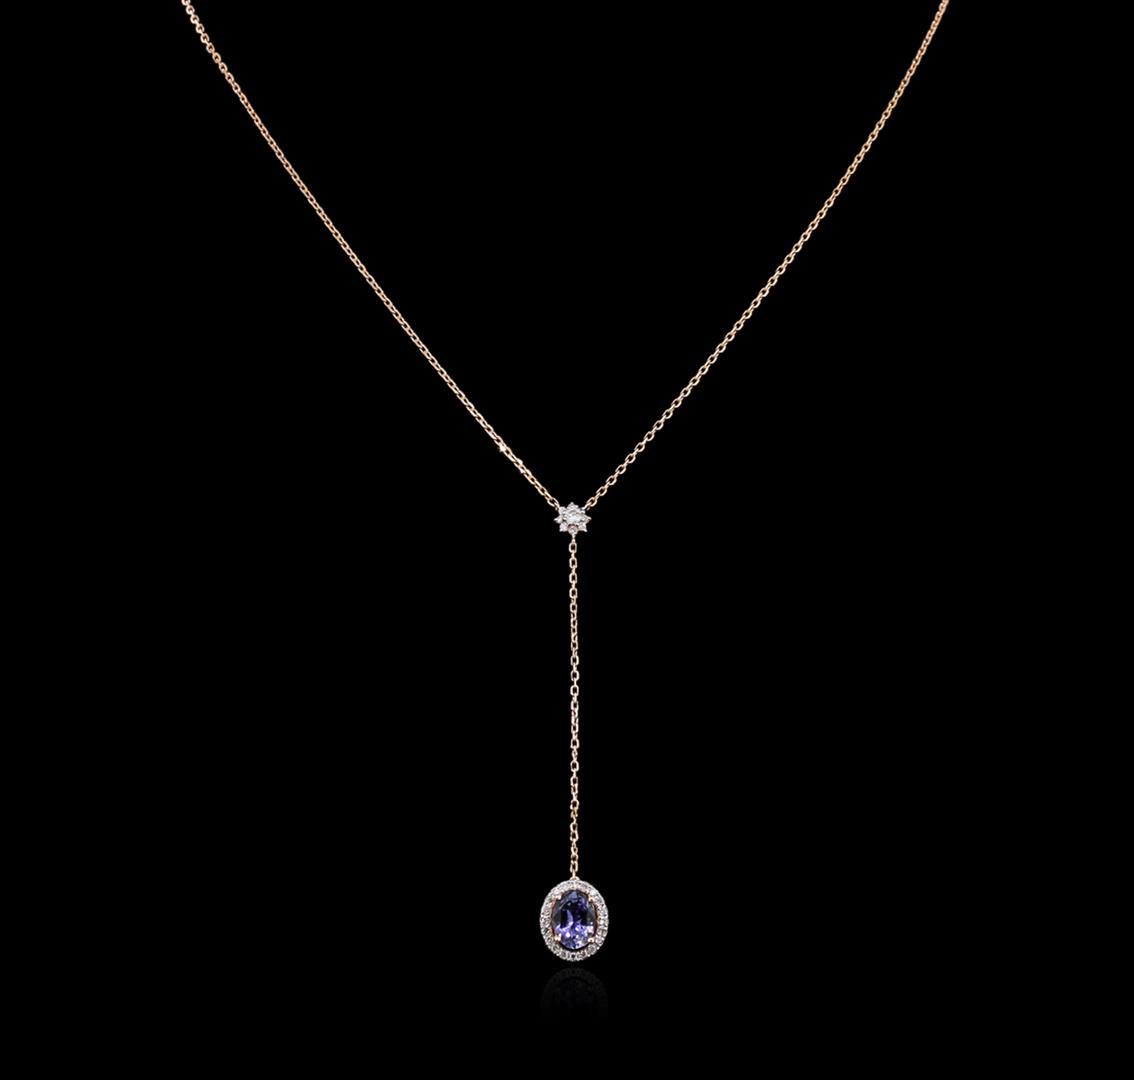 1.28 ctw Tanzanite and Diamond Necklace - 14KT Rose Gold